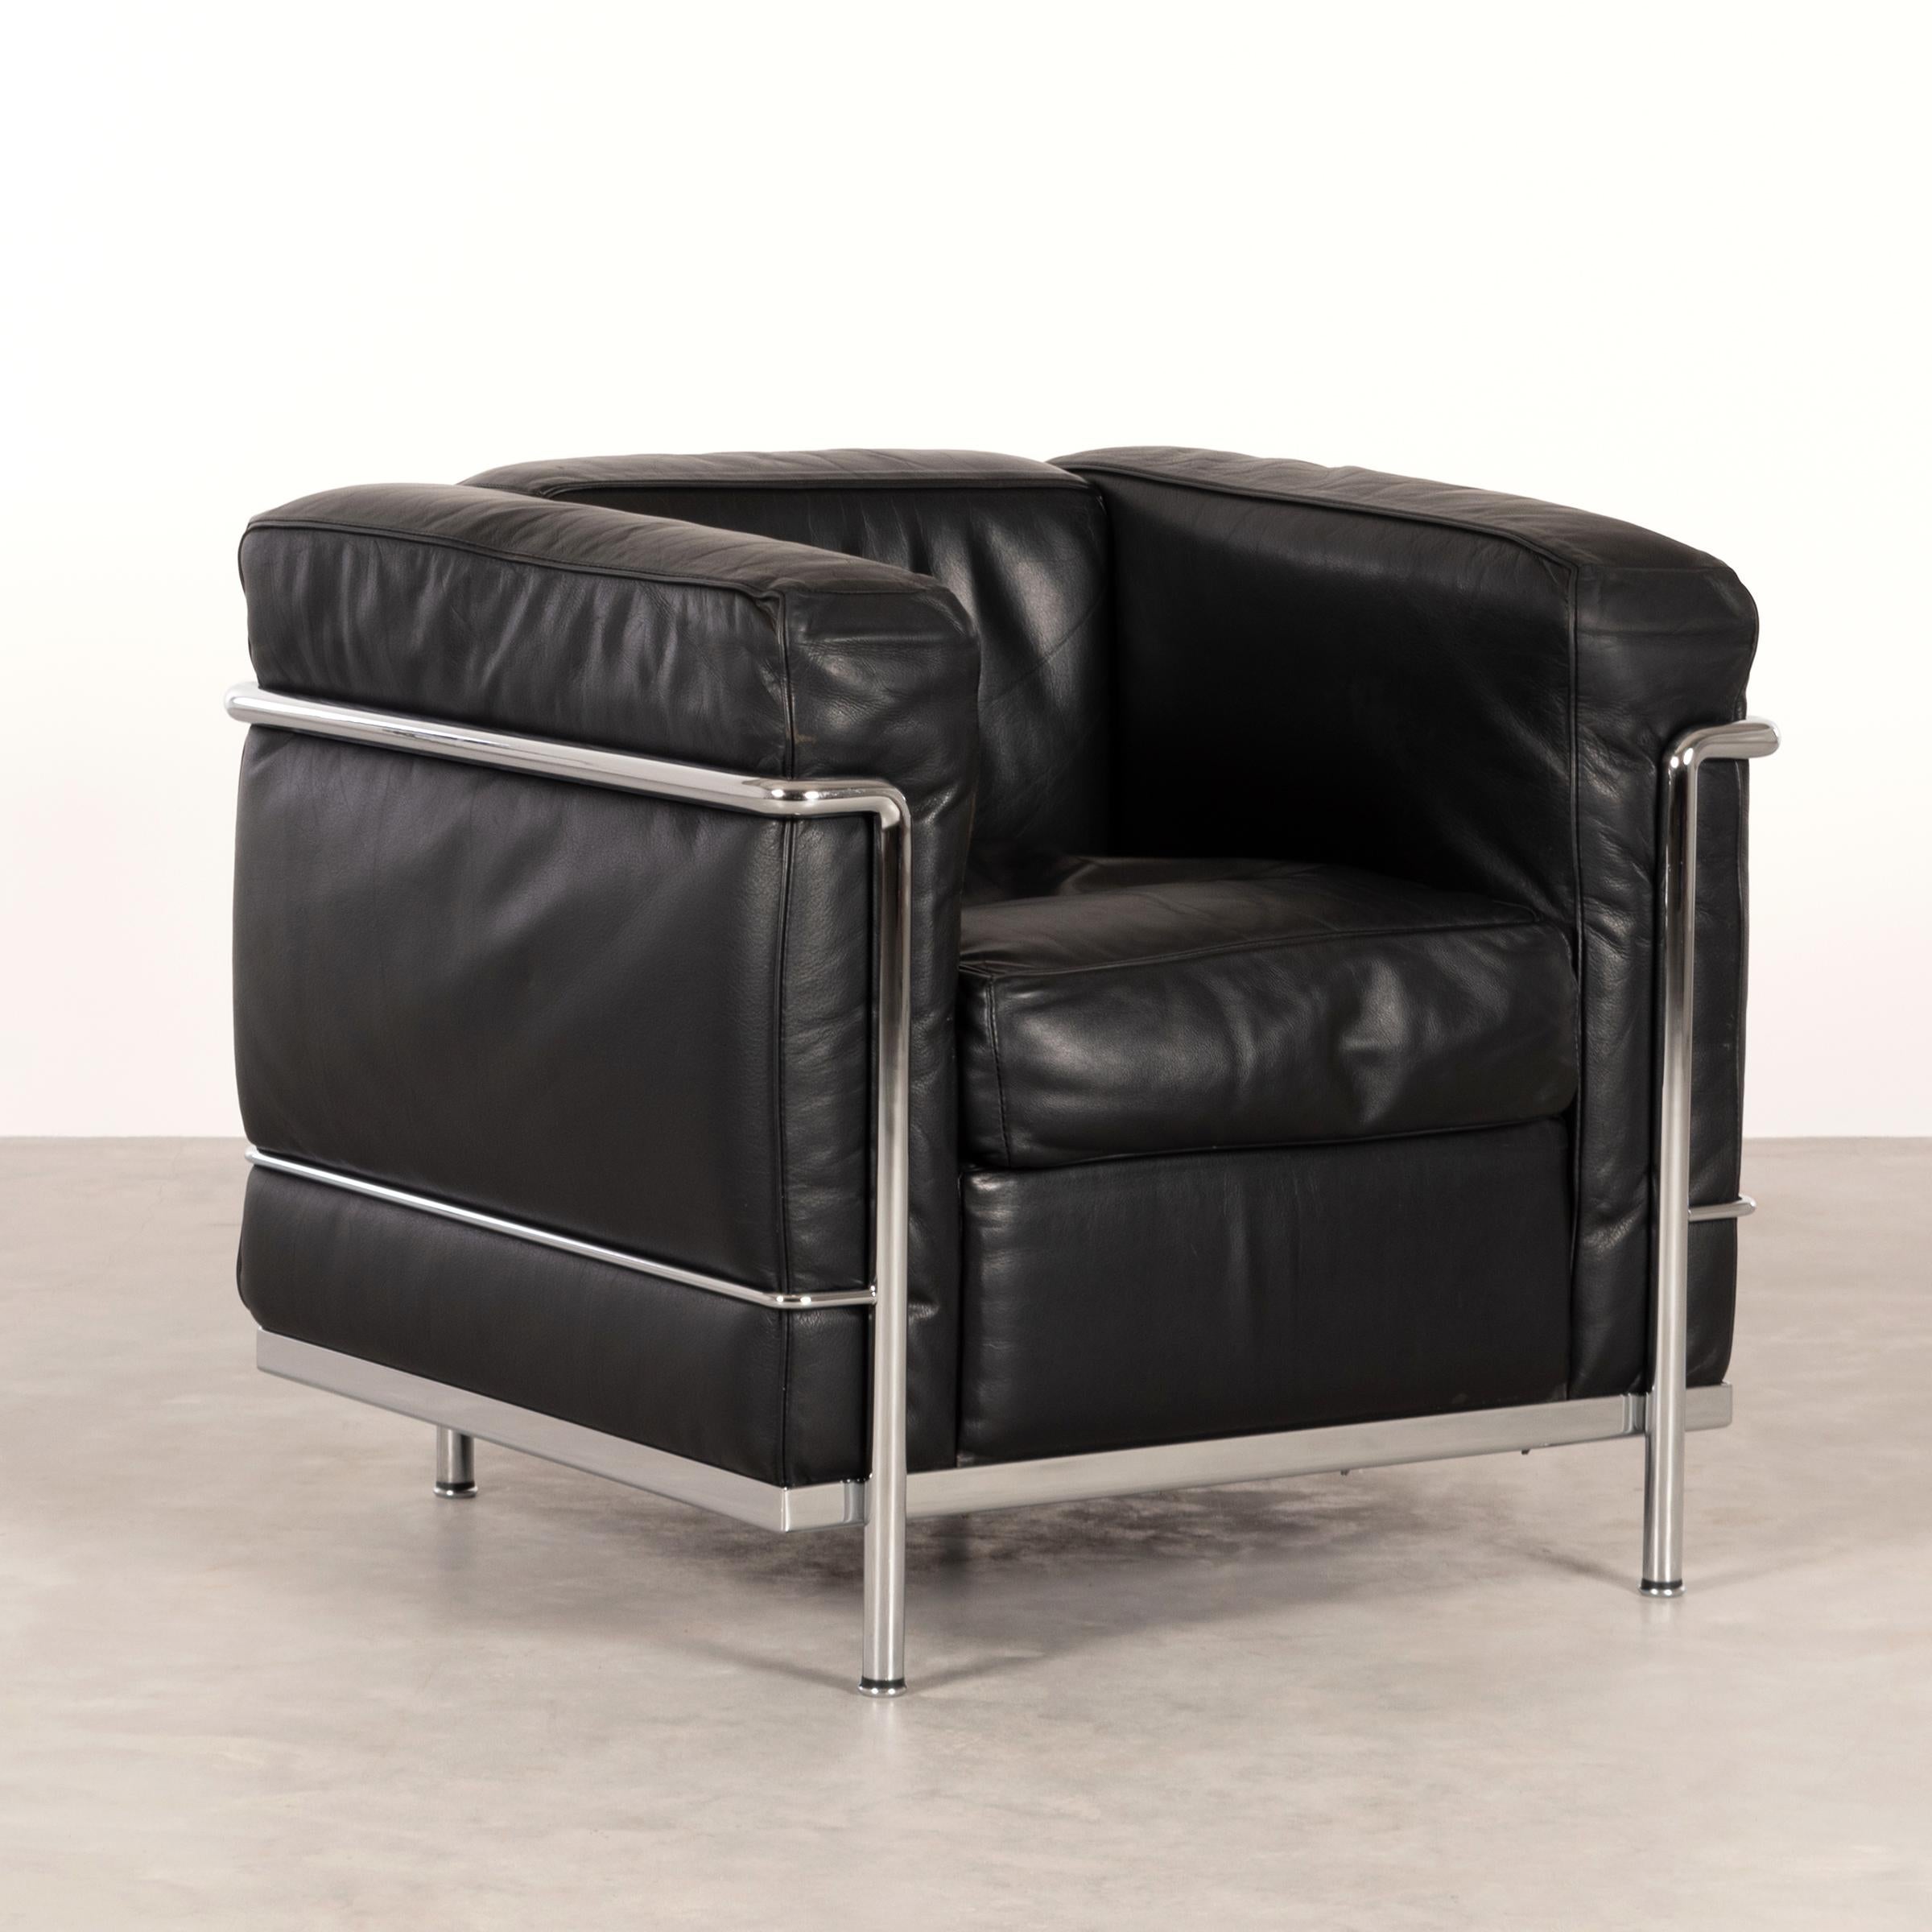 Iconic LC2 armchair designed by Le Corbusier / Pierre Jeanneret / Charlotte Perriand and produced by Cassina. chrome-plated steel frame with black leather cushions. Good original condition with sligth traces of use and patina. Signed with